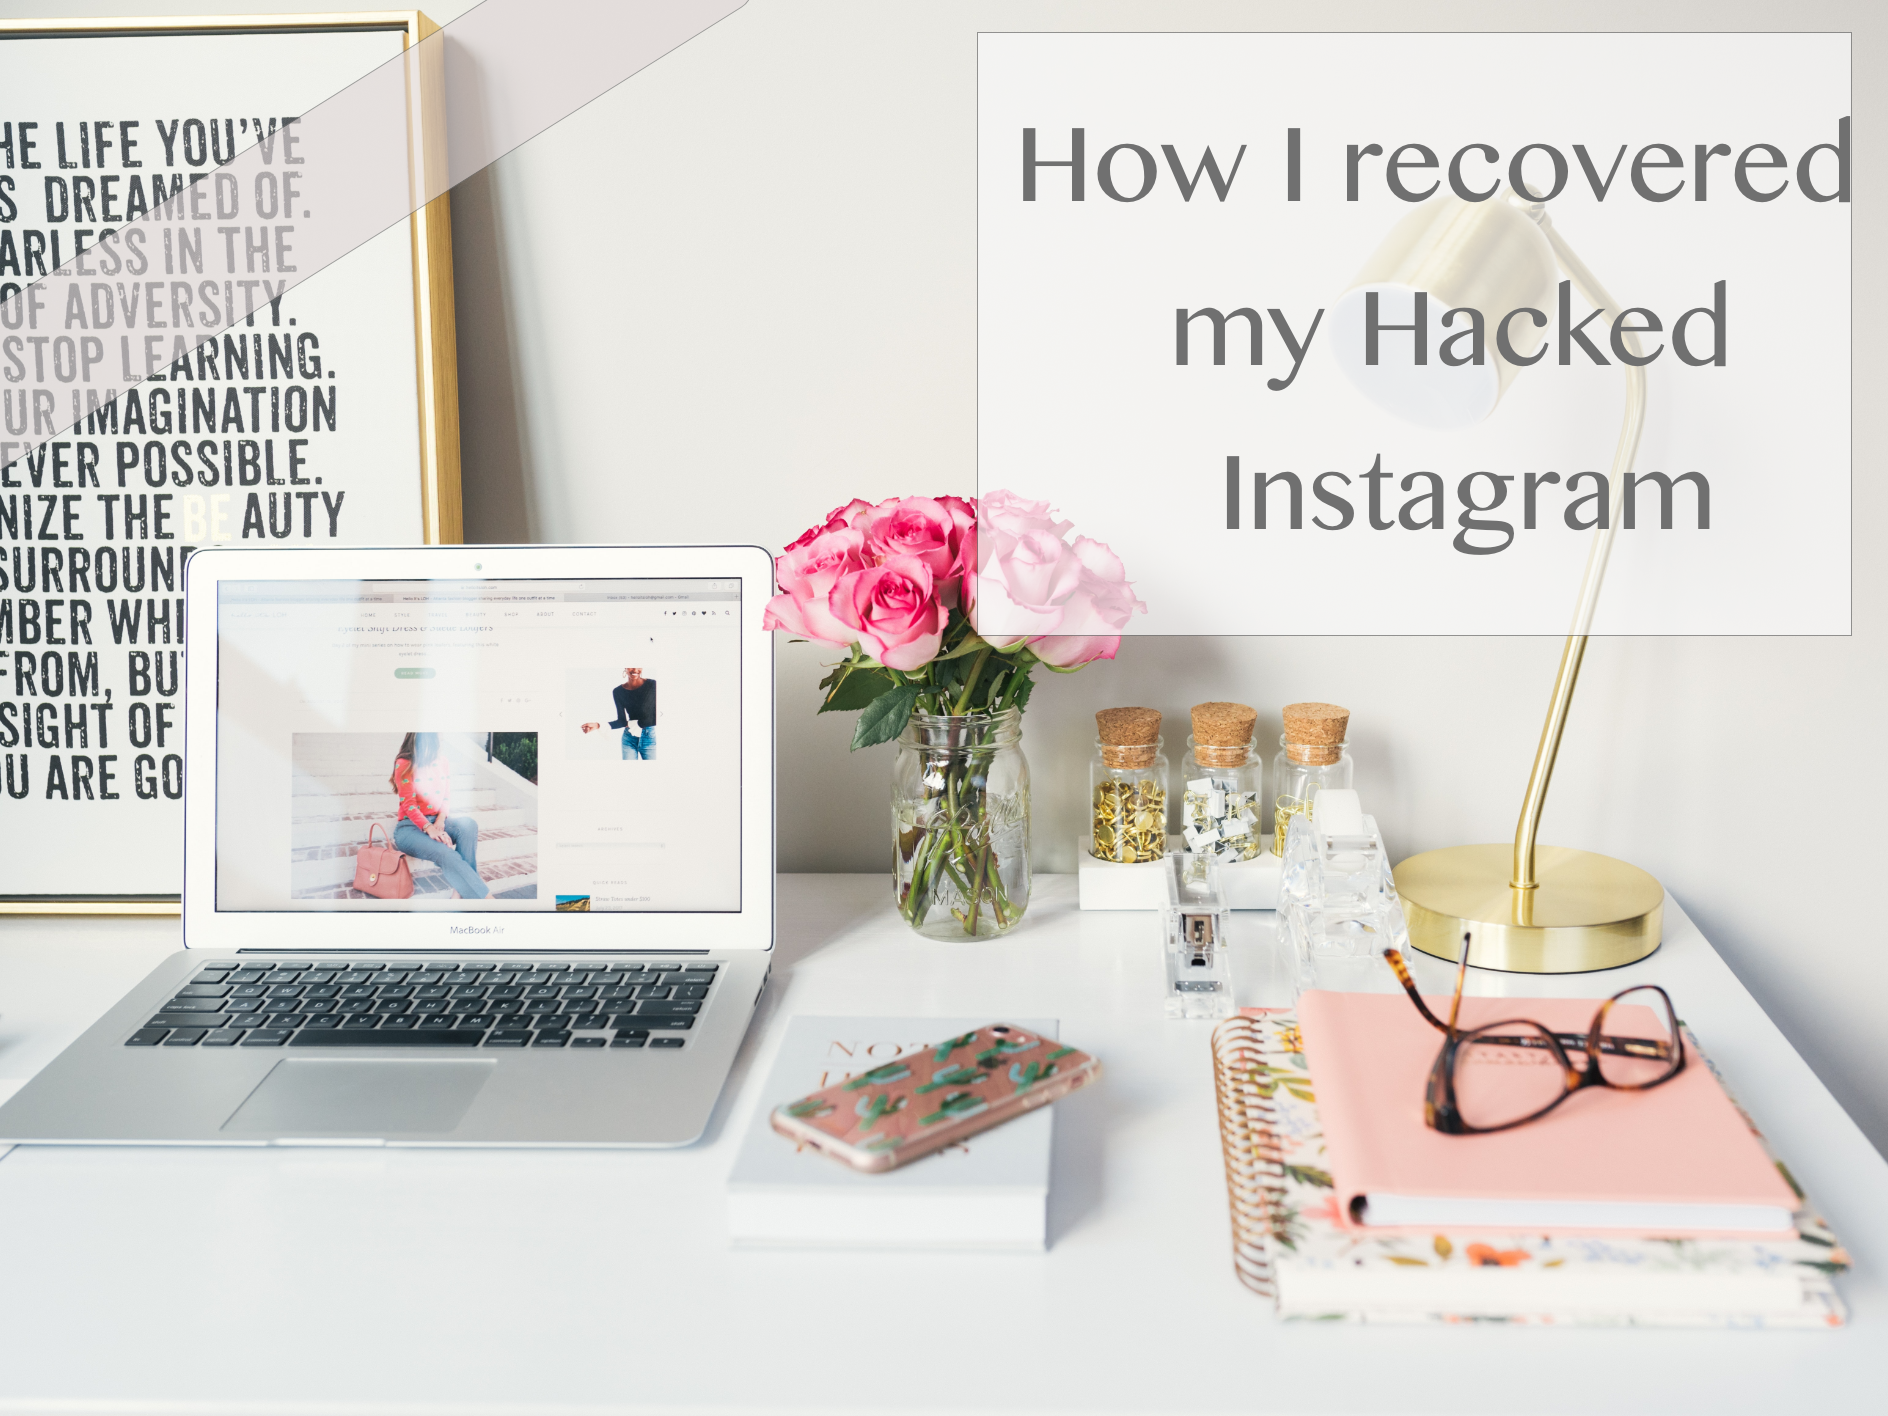 How I recovered my Hacked Instagram